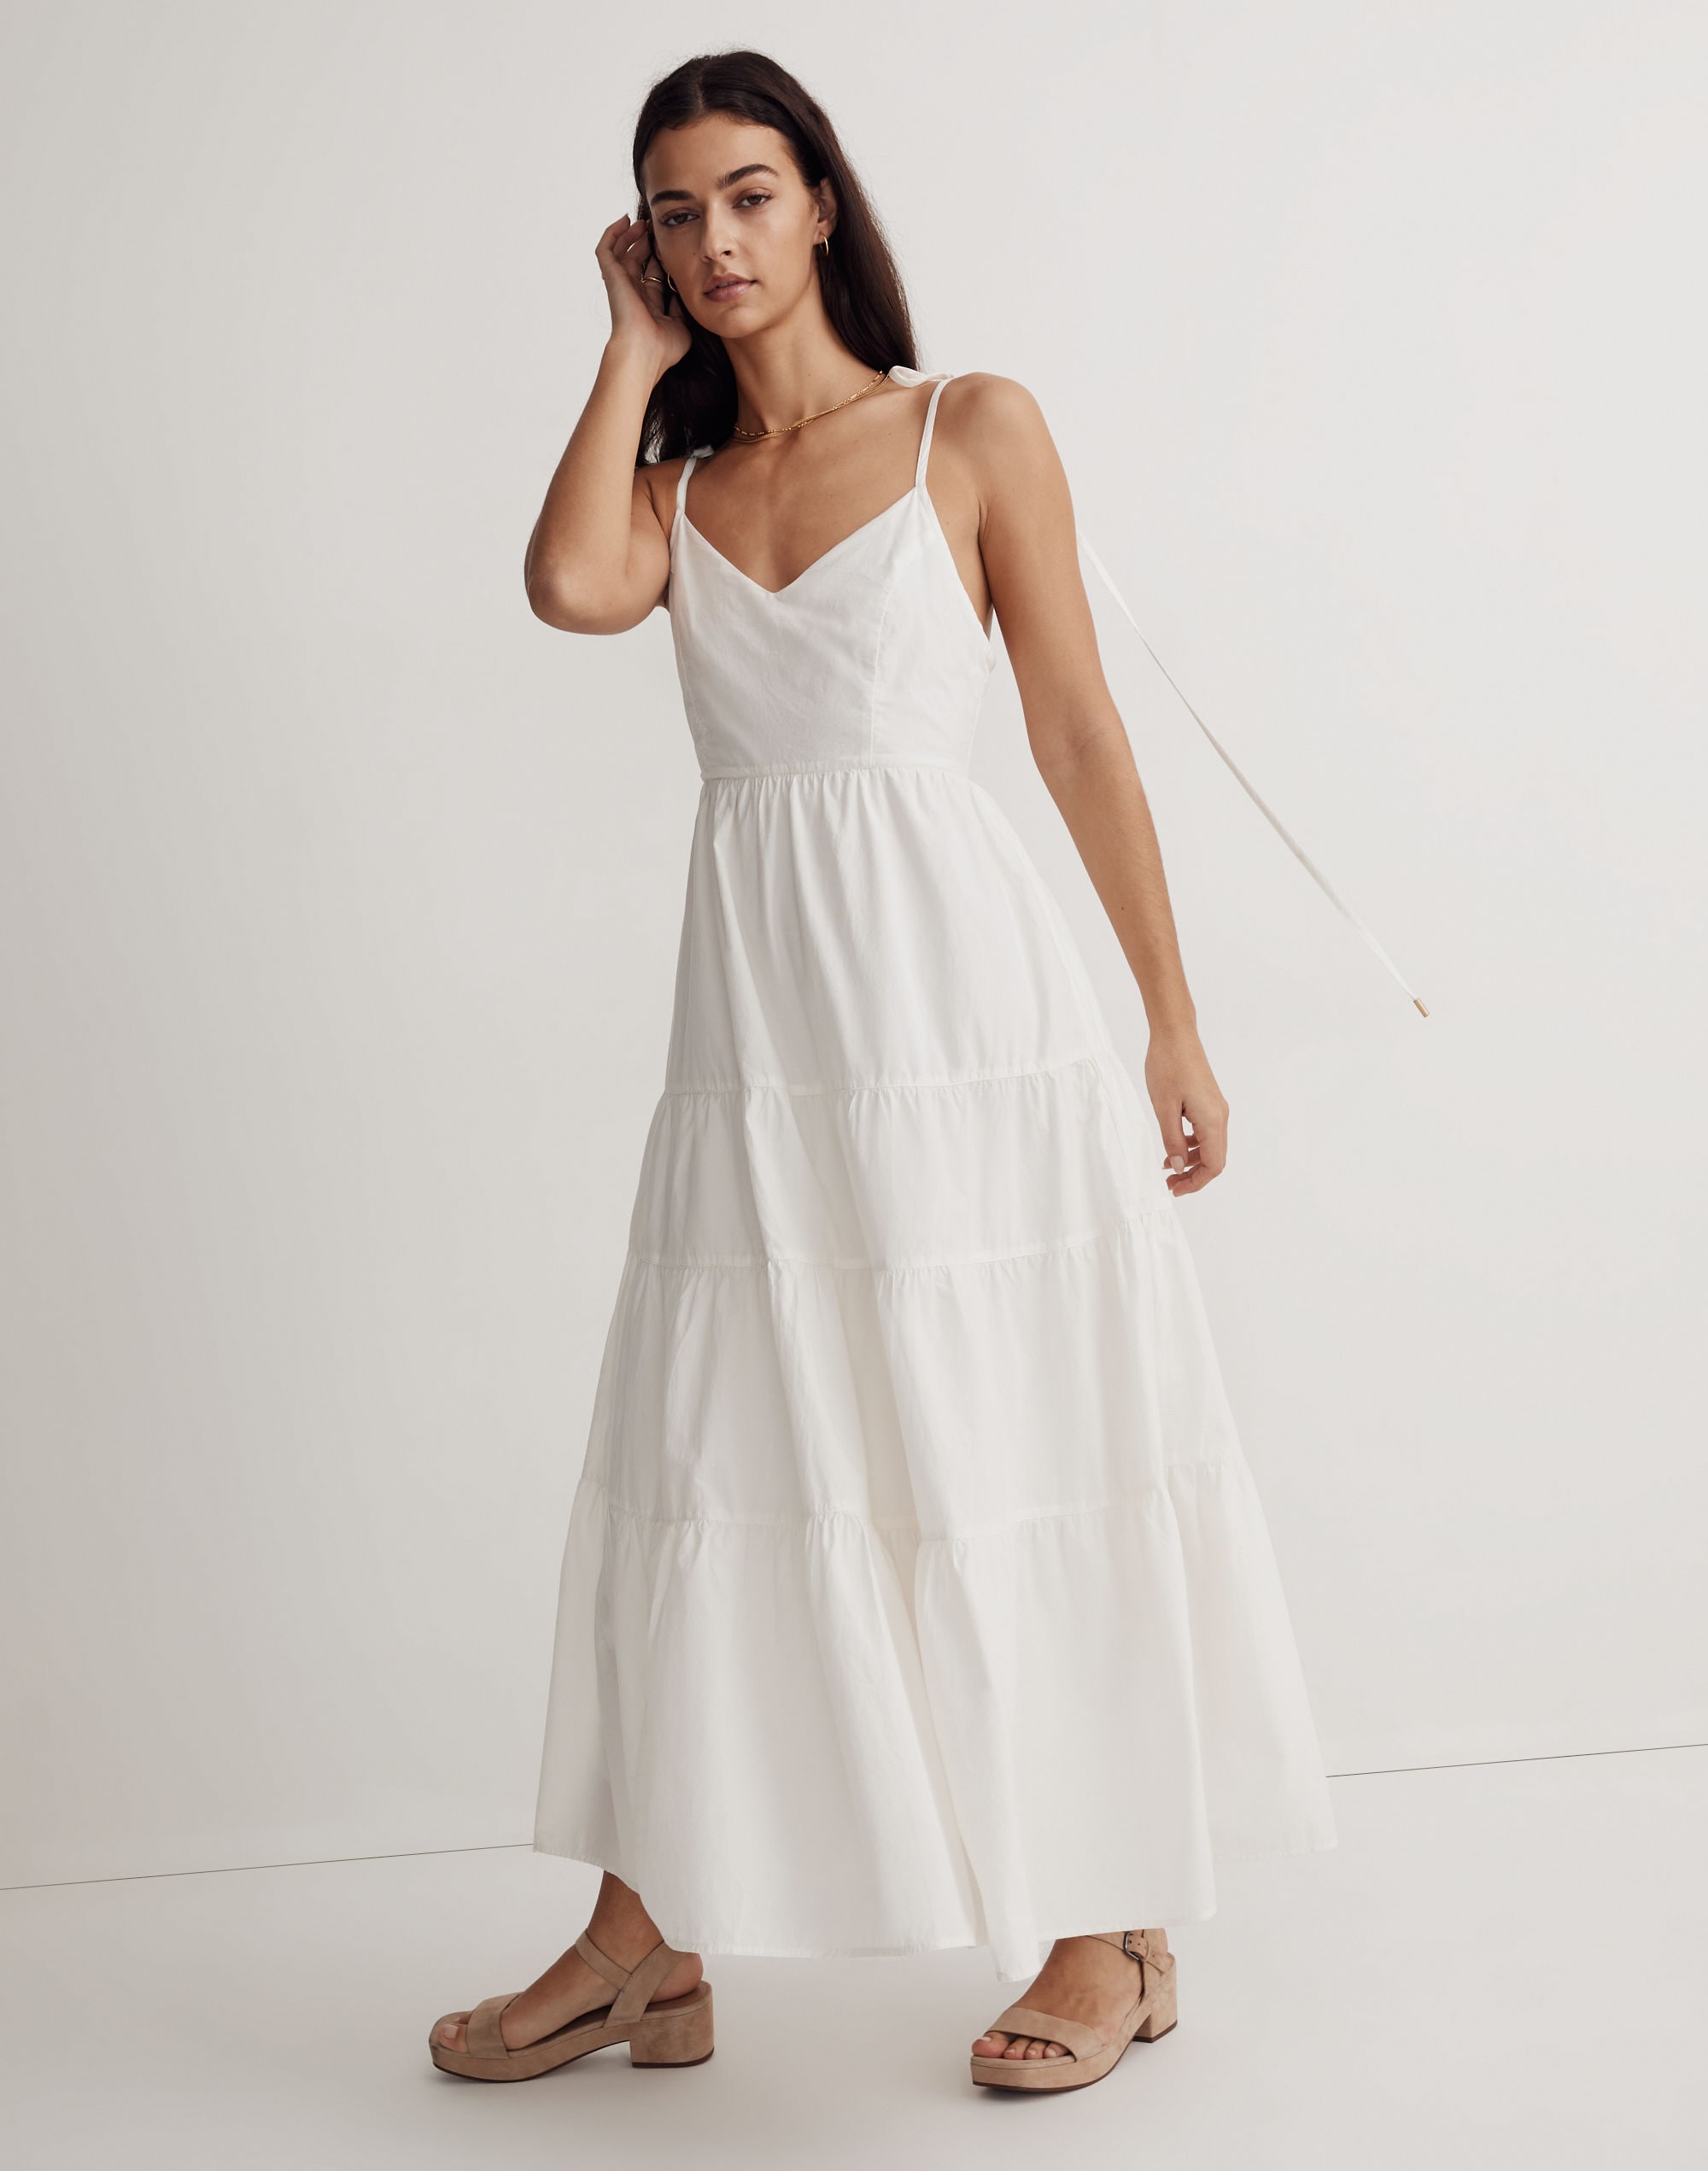 Em & May Loyal Maxi Dress with Built-In Bra